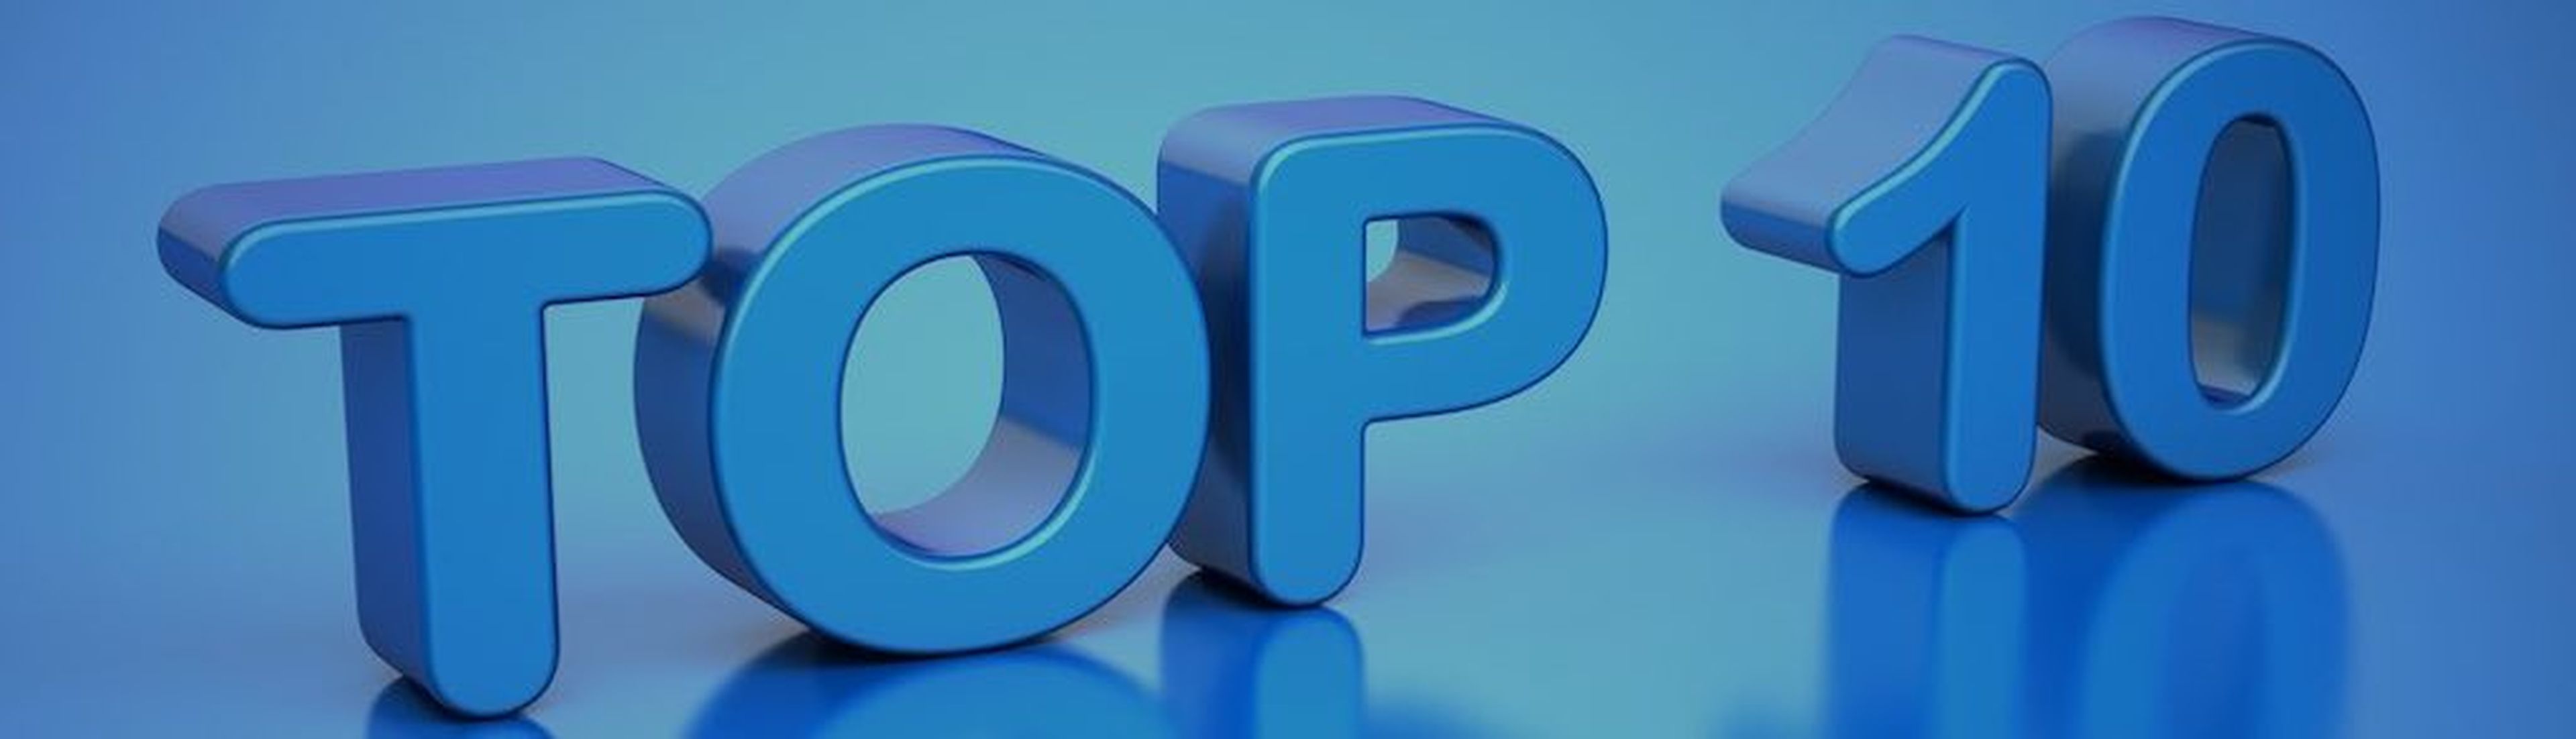 TOP 10 on Blue Background